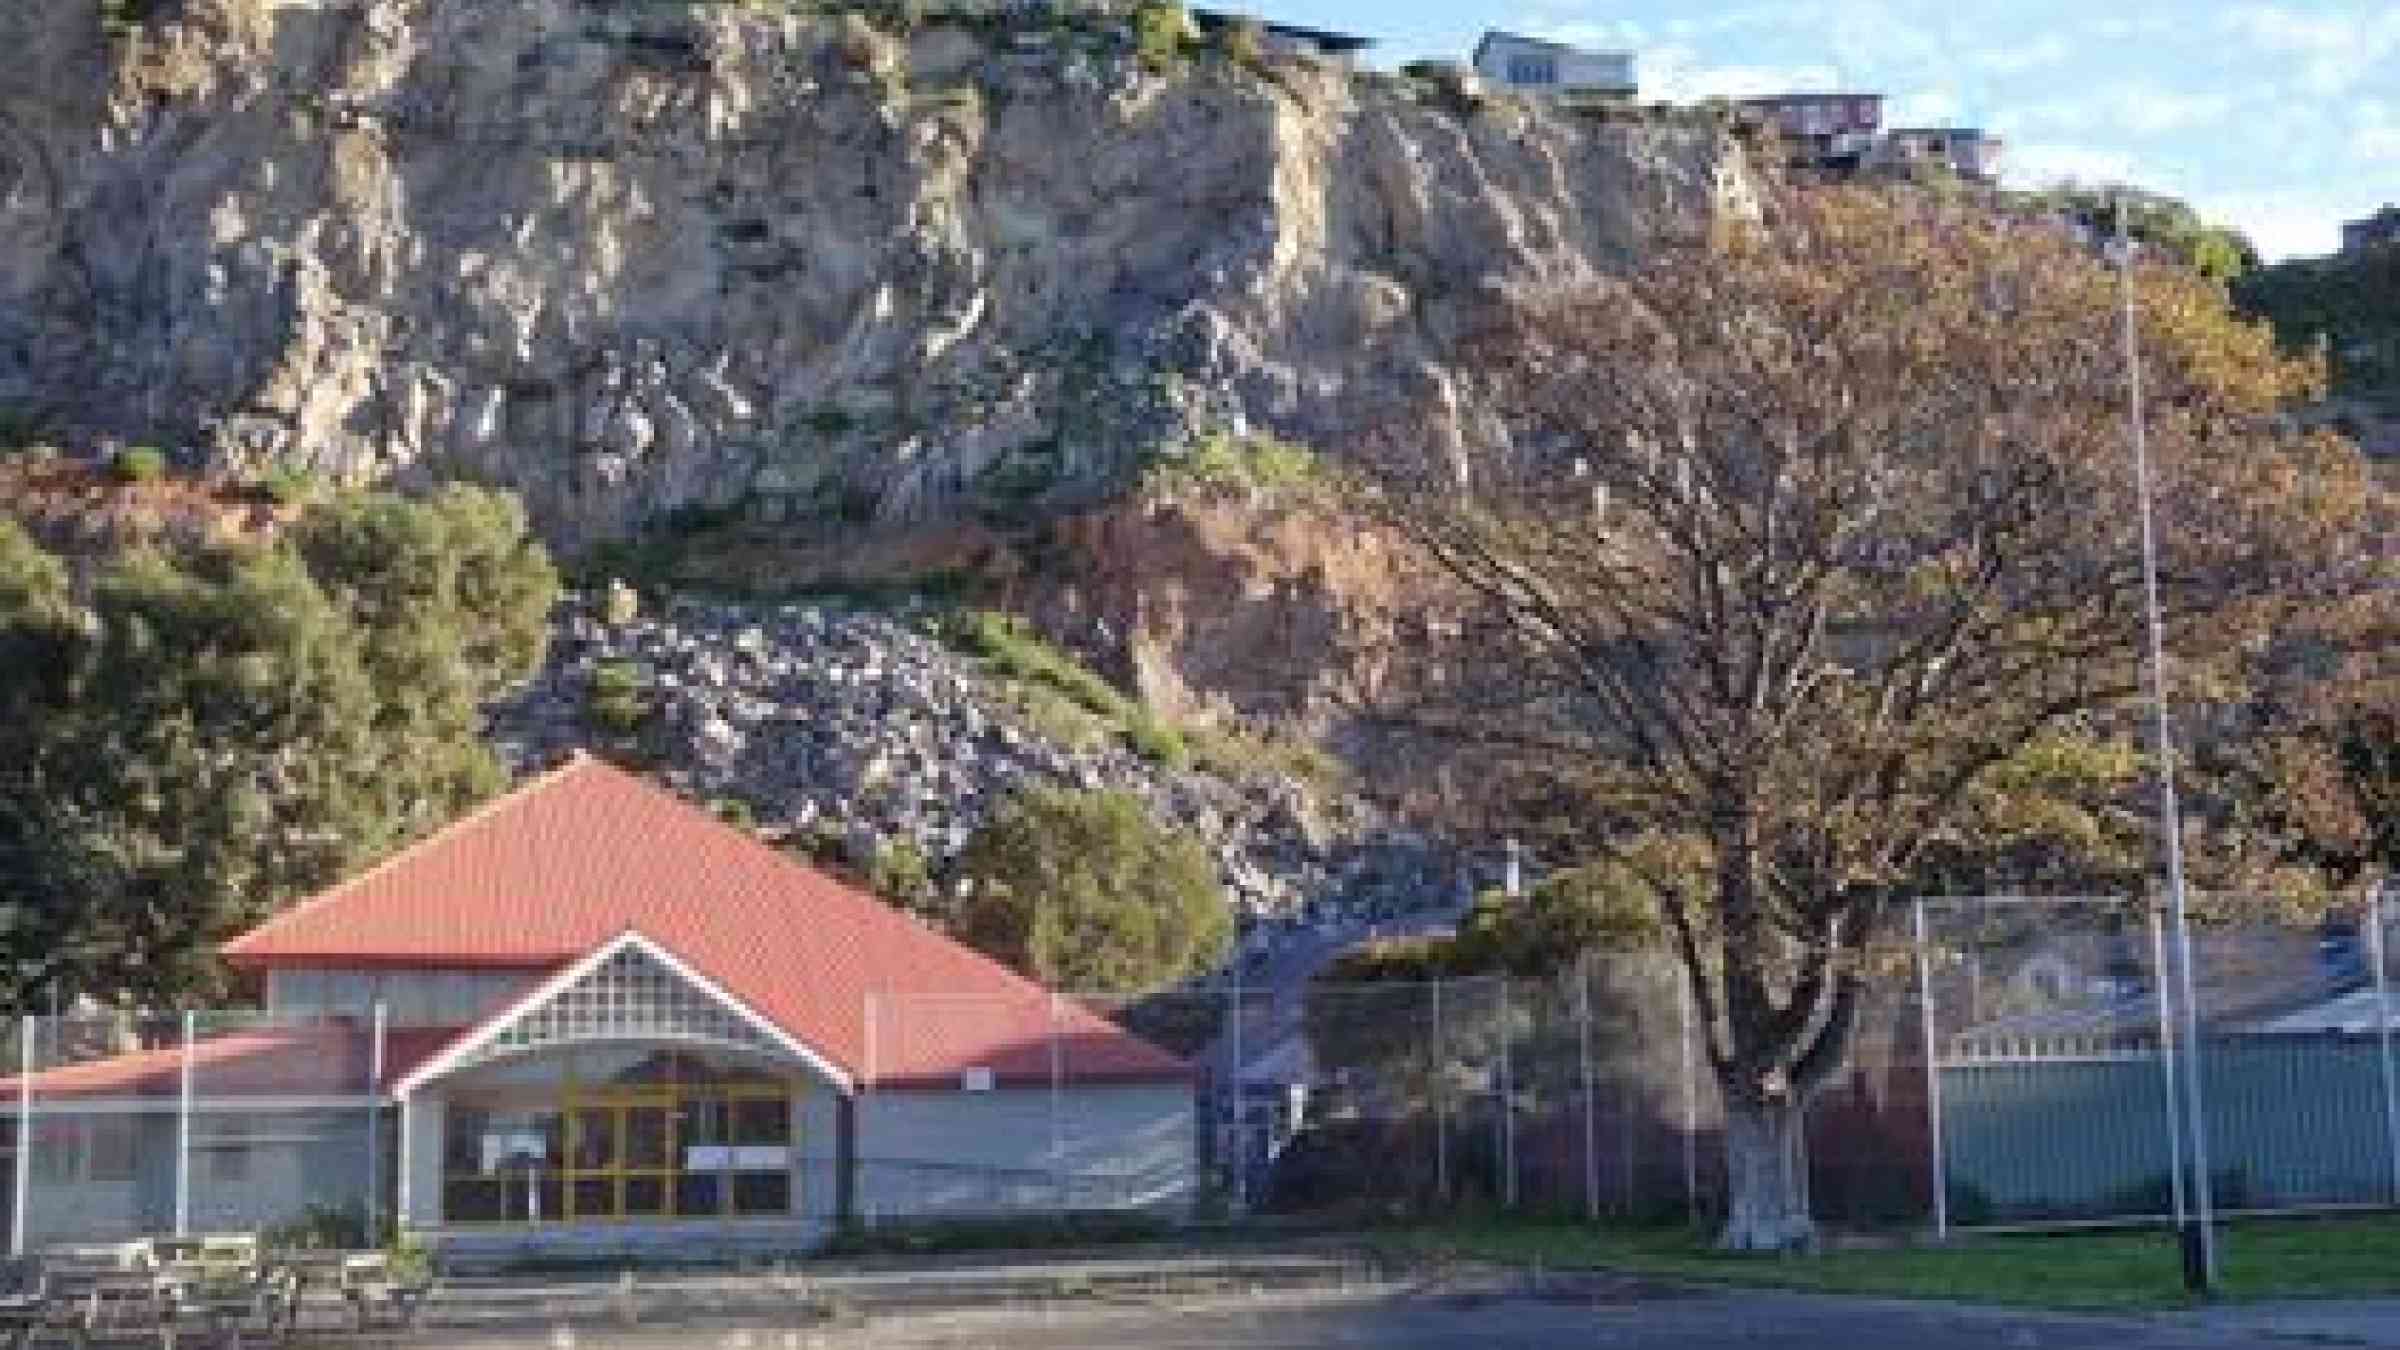 The Redcliffs School is in Christchurch's Red Zone and has been closed for three years due to the danger of rockfalls triggered by earthquakes and aftershocks. No schoolchildren died in the Christchurch earthquakes of 2010 and 2011. The houses built on top of the cliff have all been abandoned. (Photo: UNISDR)